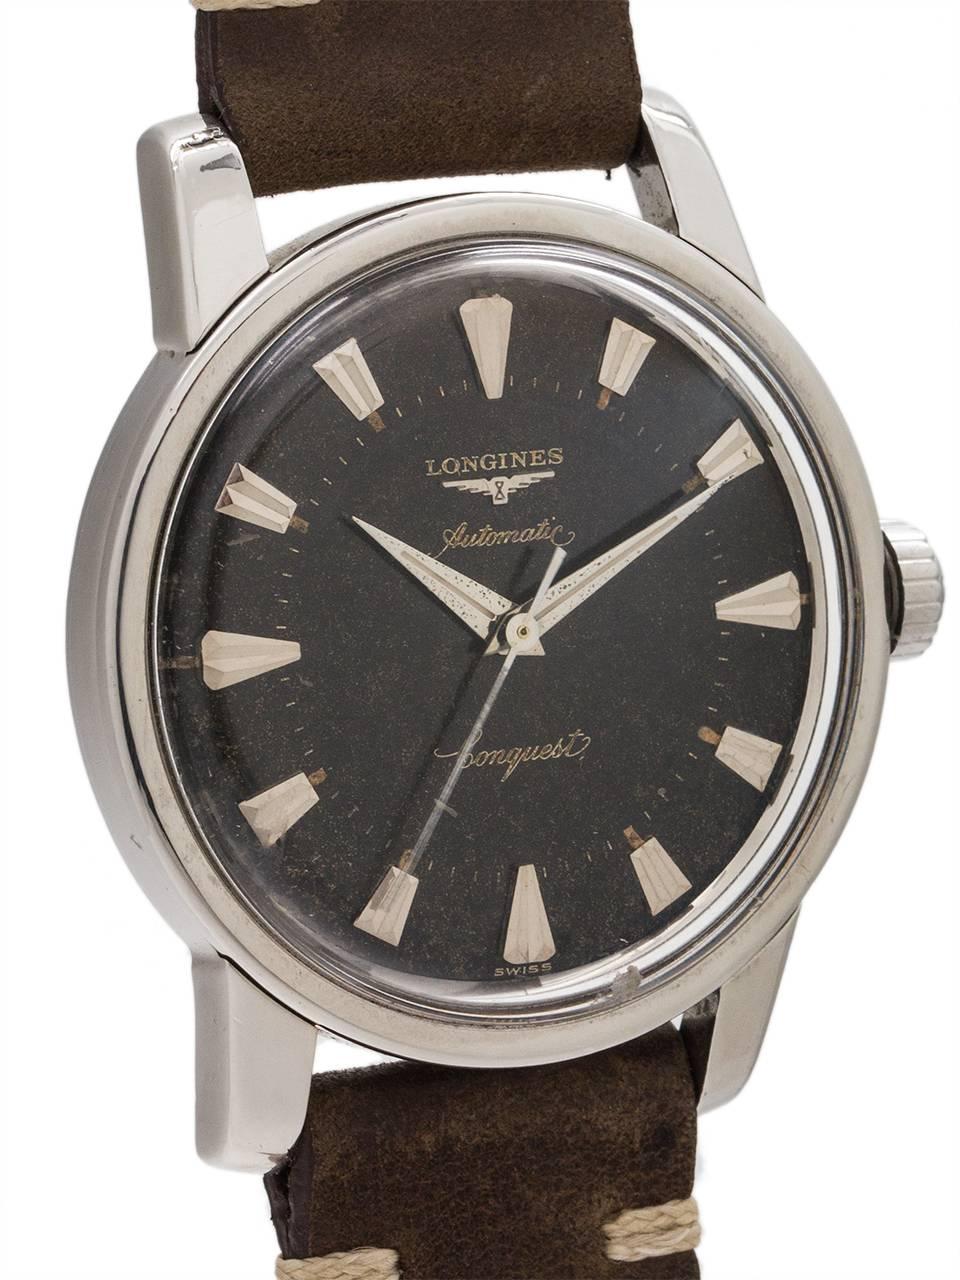 
Longines Conquest stainless steel automatic circa 1960. Featuring a robust 36mm diameter case with wide bezel and heavy rounded lugs, and screw down caseback with fish logo. Acrylic crystal, and original black “tropical” dial with applied oversize